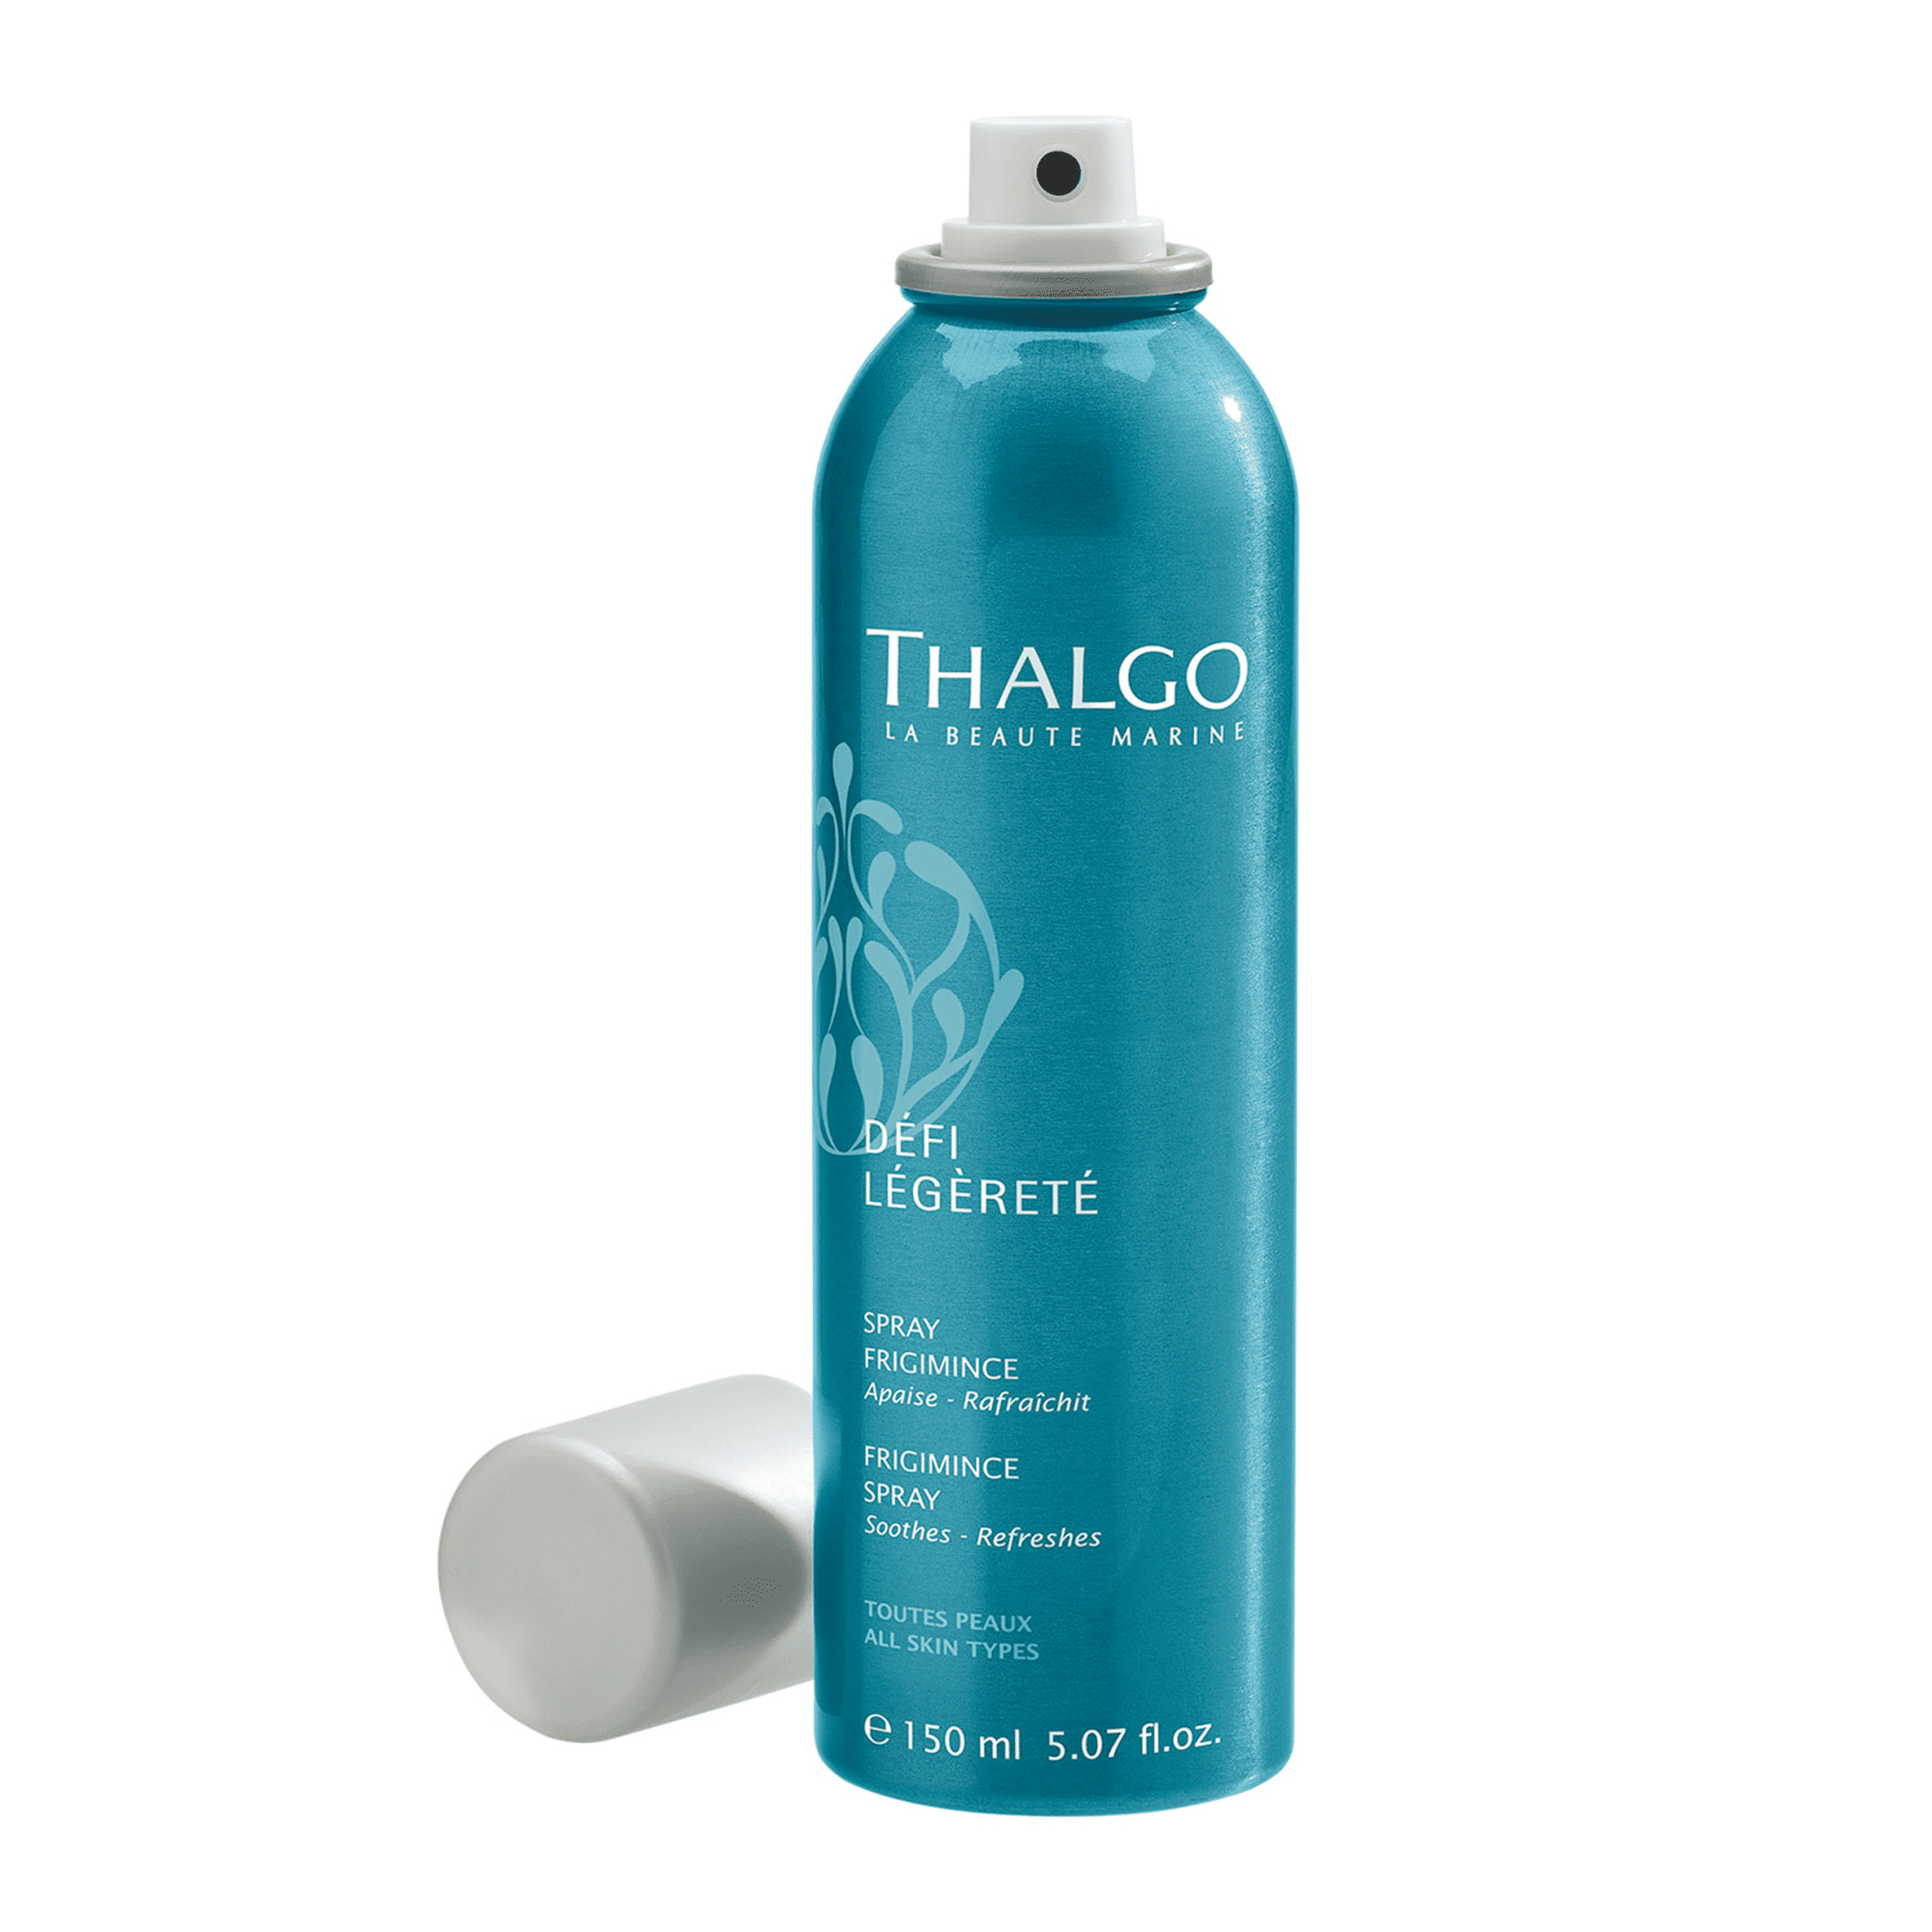 Thalgo Well Being Frigimince Spray 150ml - Cooling body spray for good google rankings